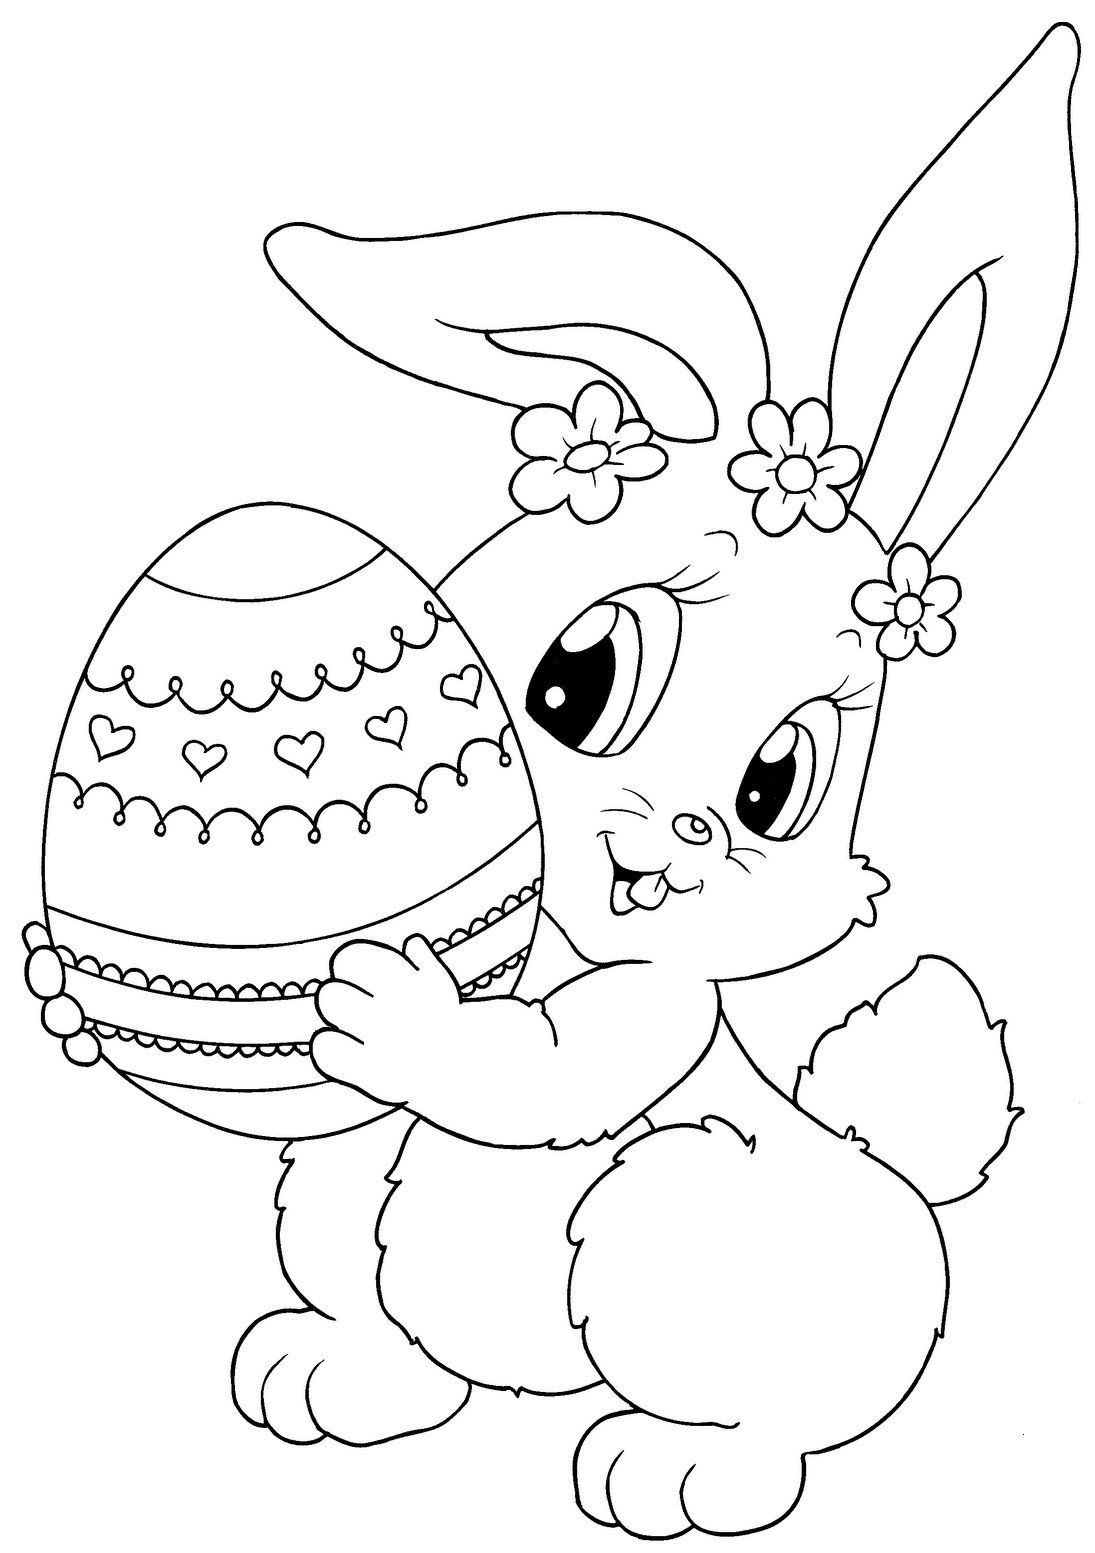 Top 15 Free Printable Easter Bunny Coloring Pages Online | Зентангл - Coloring Pages Free Printable Easter